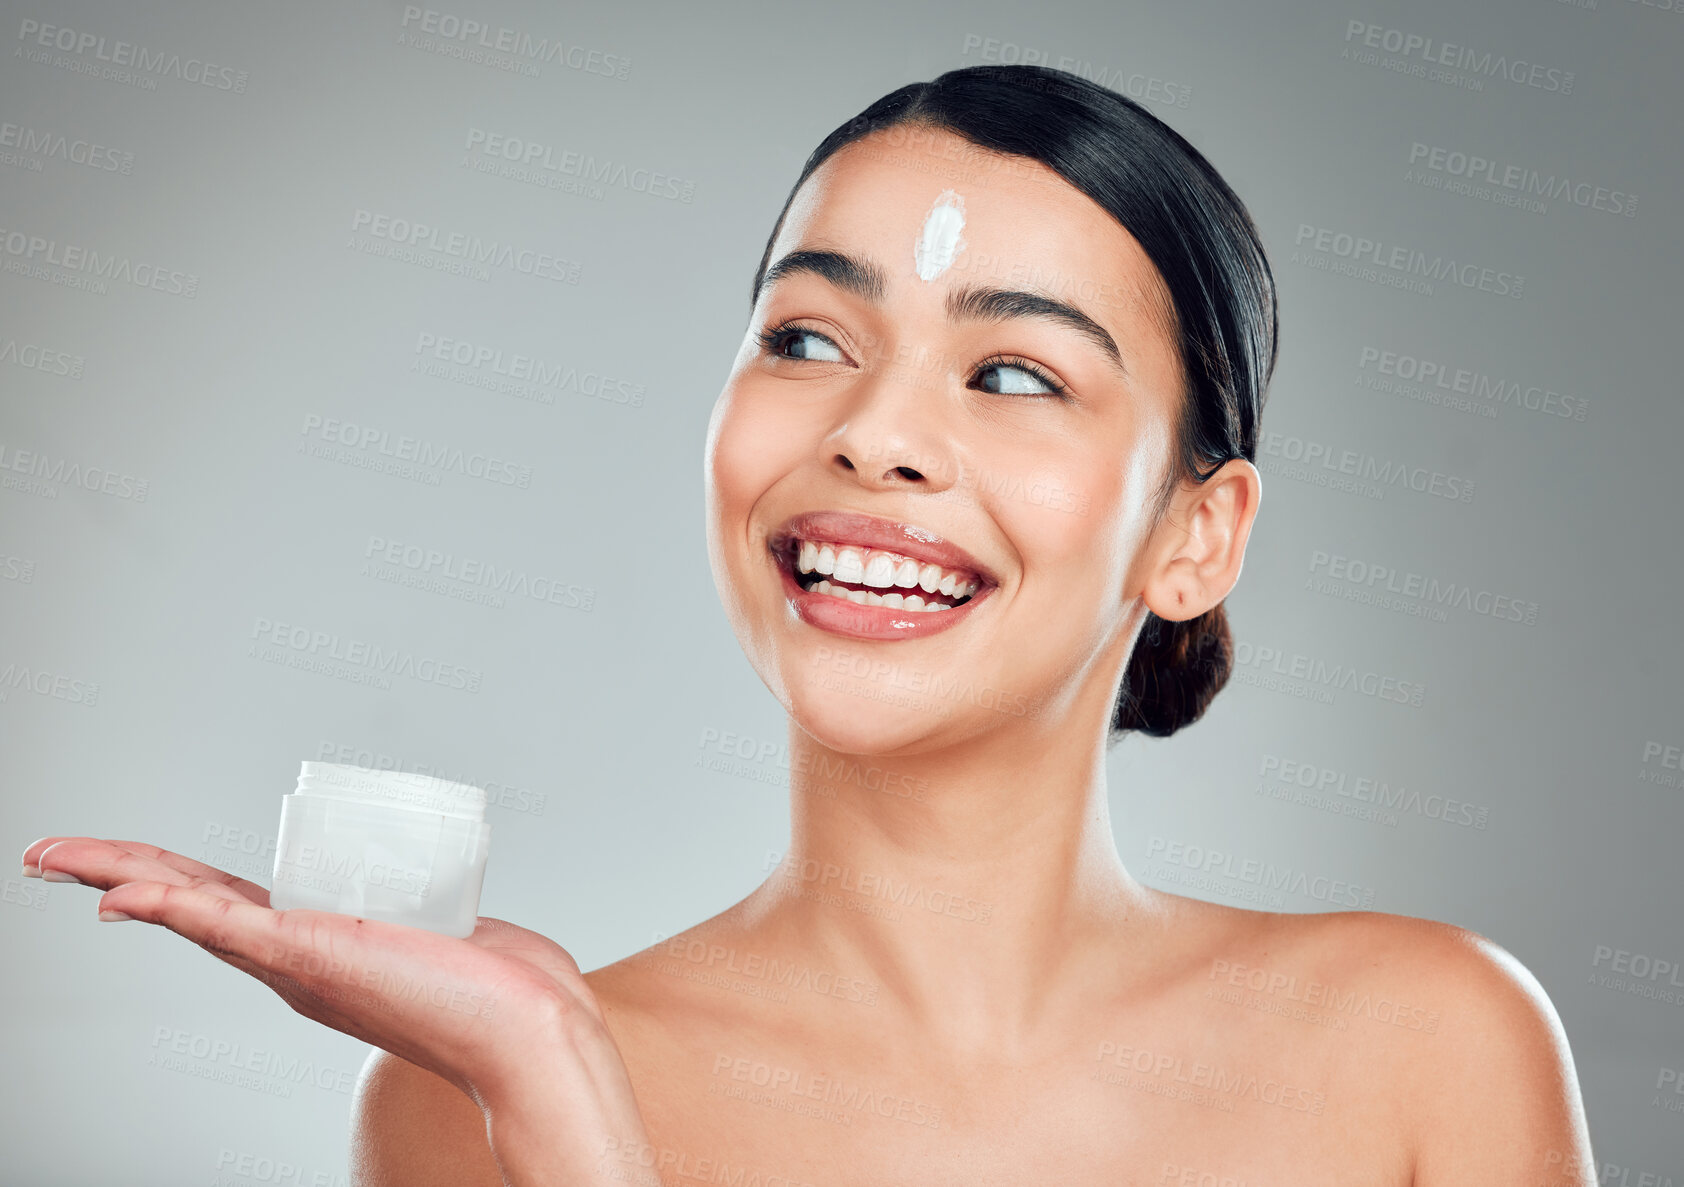 Buy stock photo A beautiful smiling mixed race woman applying cream to her face. Hispanic model with glowing skin holding moisturiser against a grey copyspace background